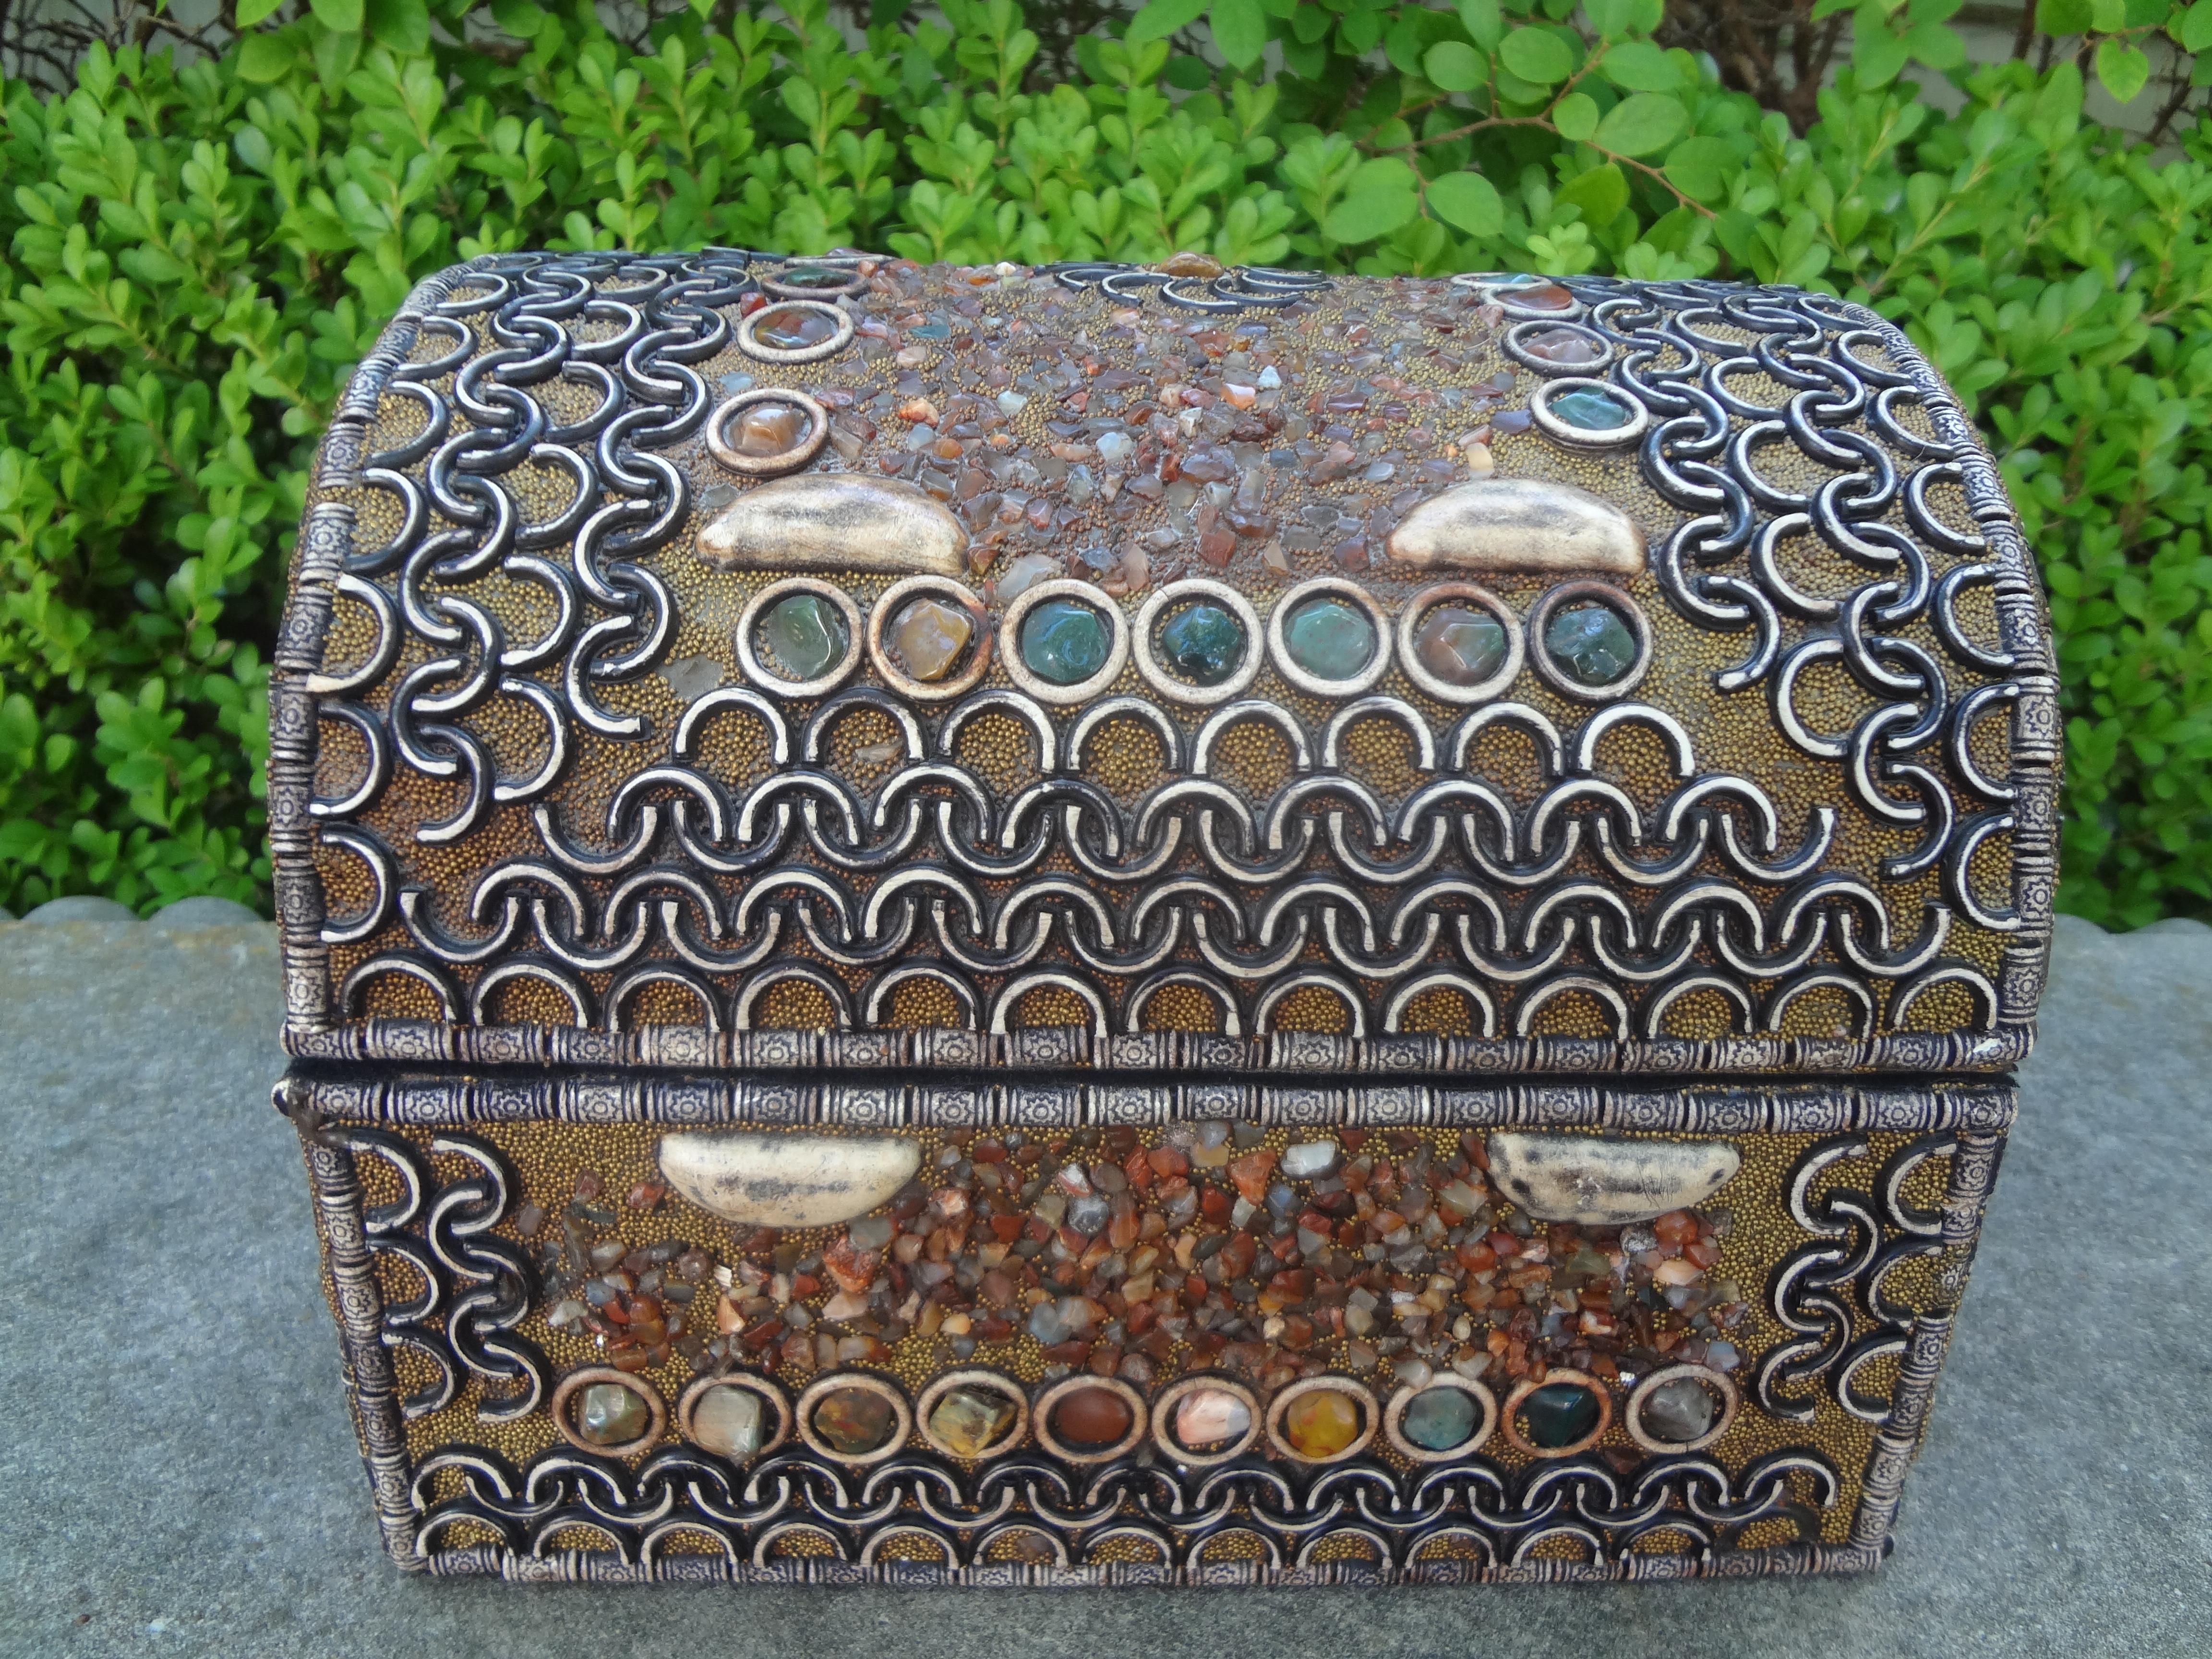 Middle Eastern Agate encrusted decorative box. This Large silver middle eastern metal decorative box is encrusted with multi-colored agate stones in a variety of shapes and sizes. Our anglo-indian box, possibly from morocco makes a great coffee